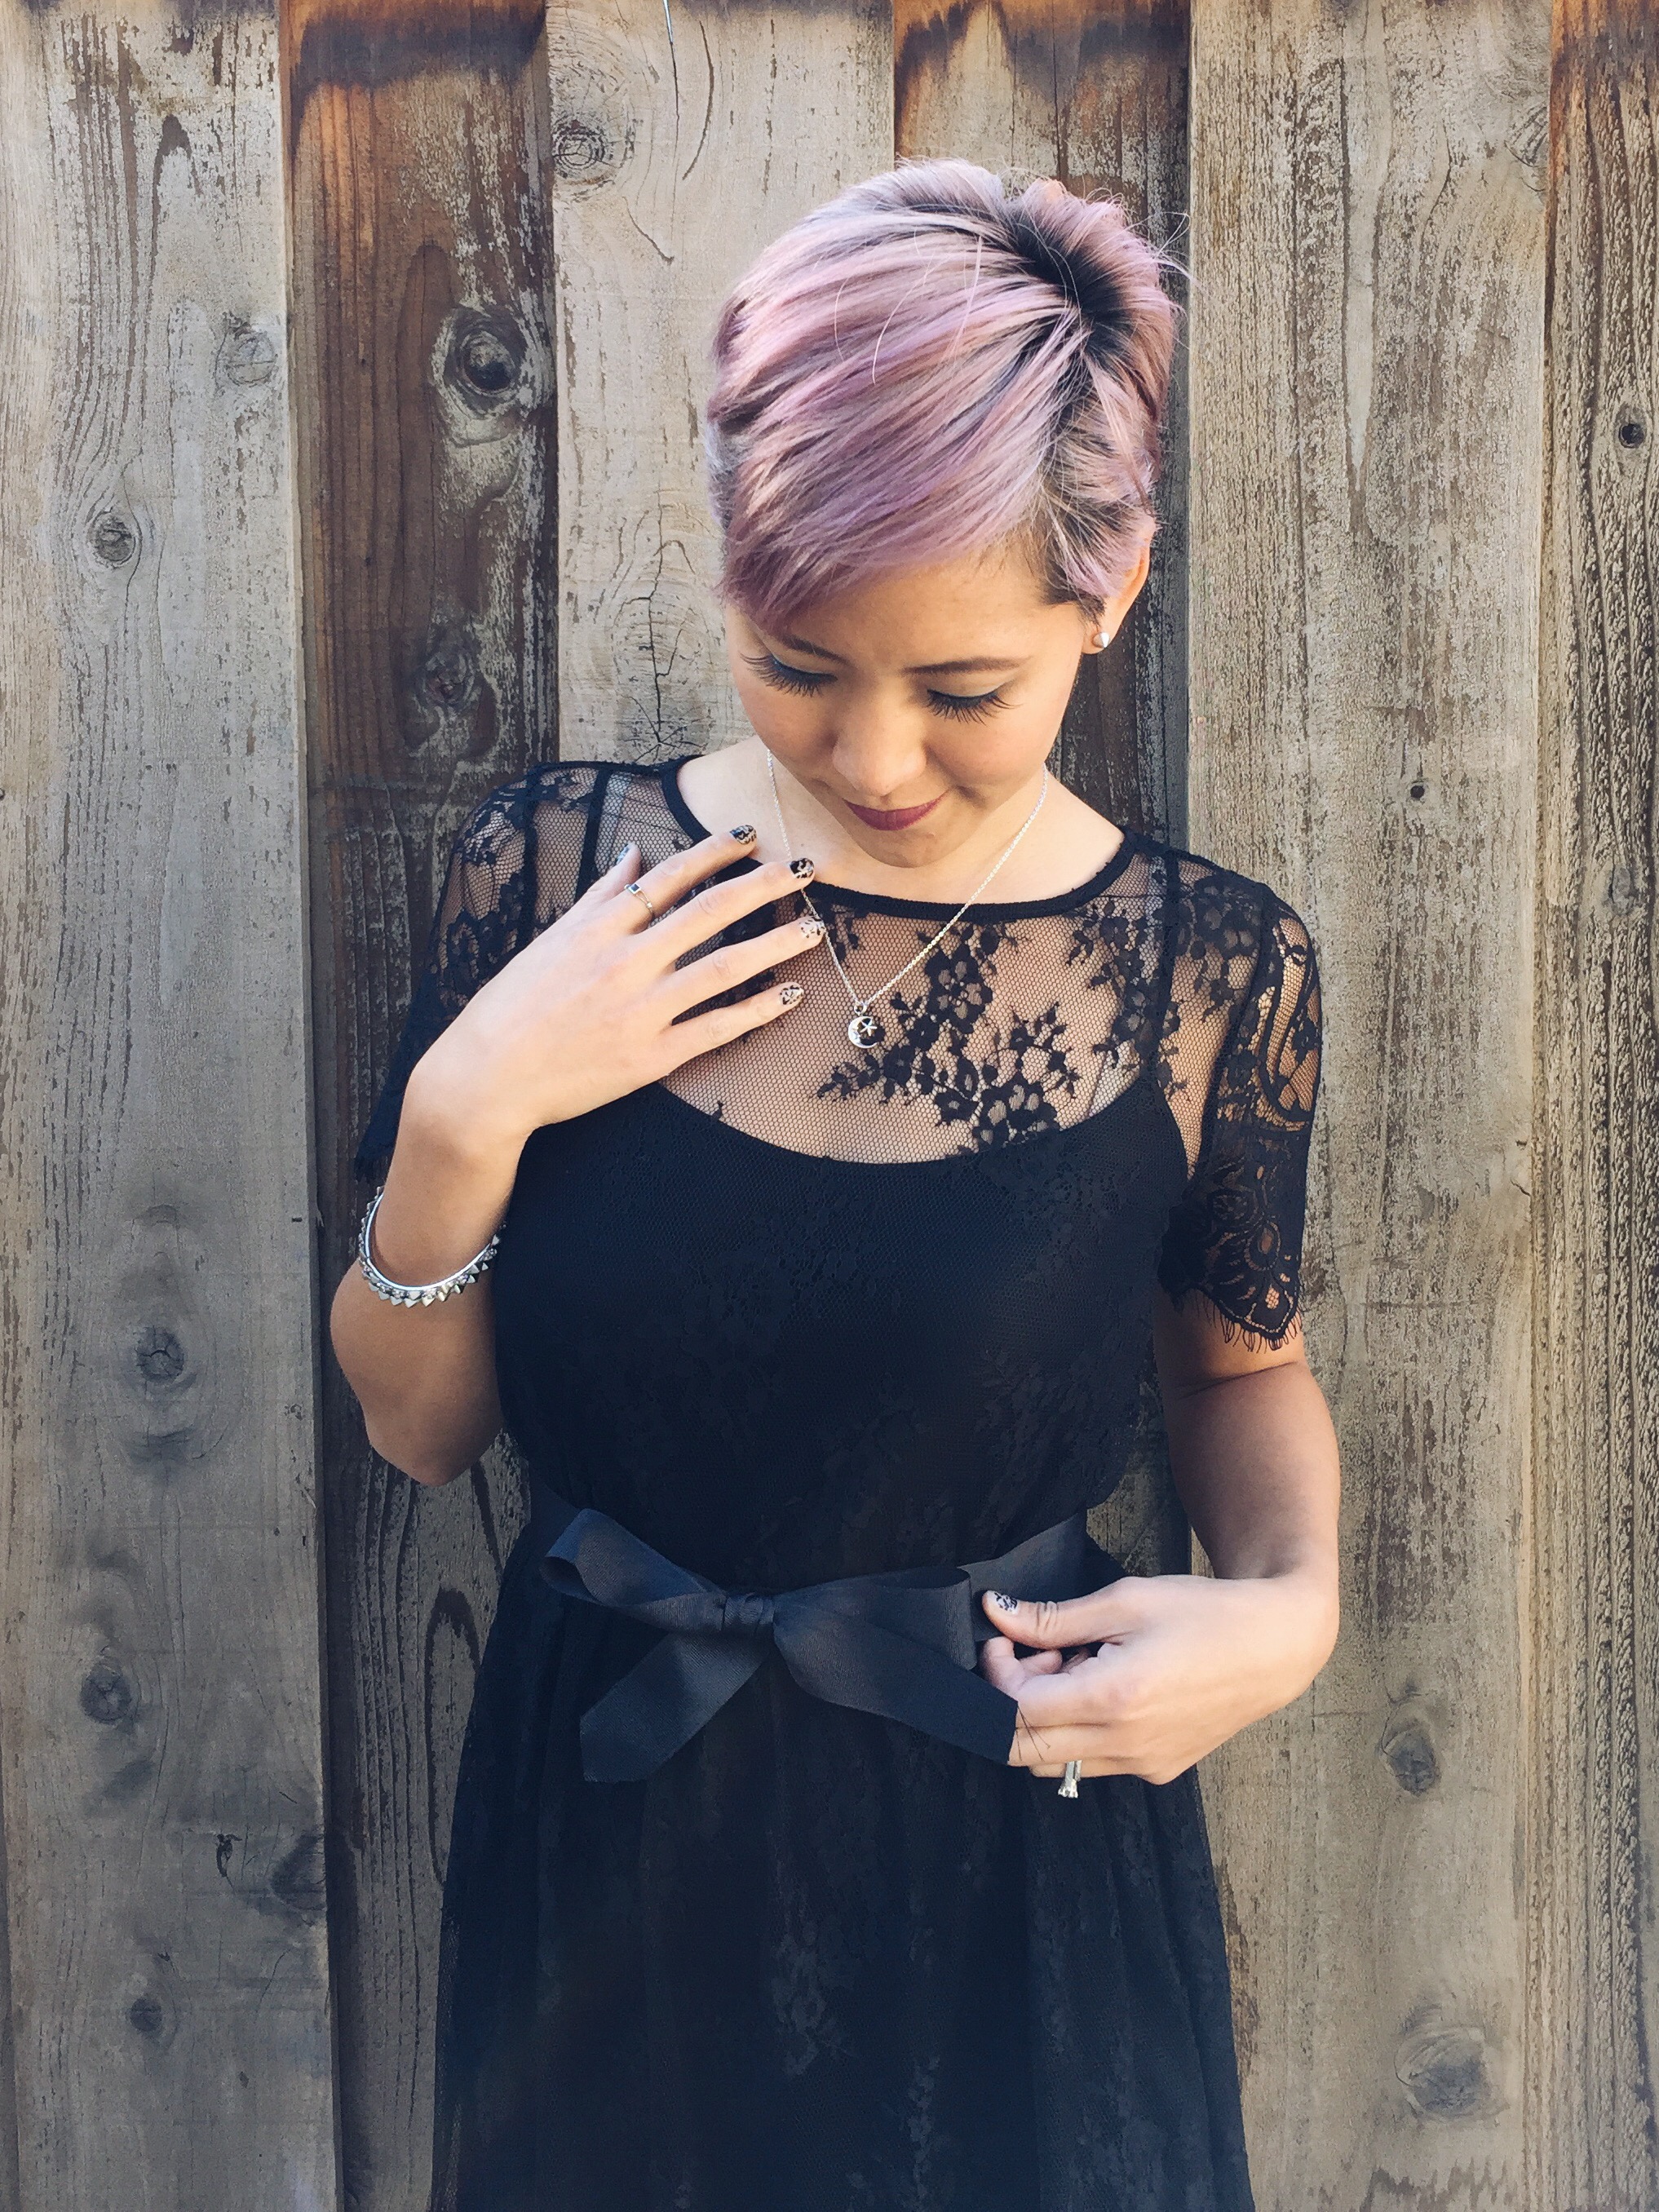 Black Lace Sheer Dress with Pastel Hair